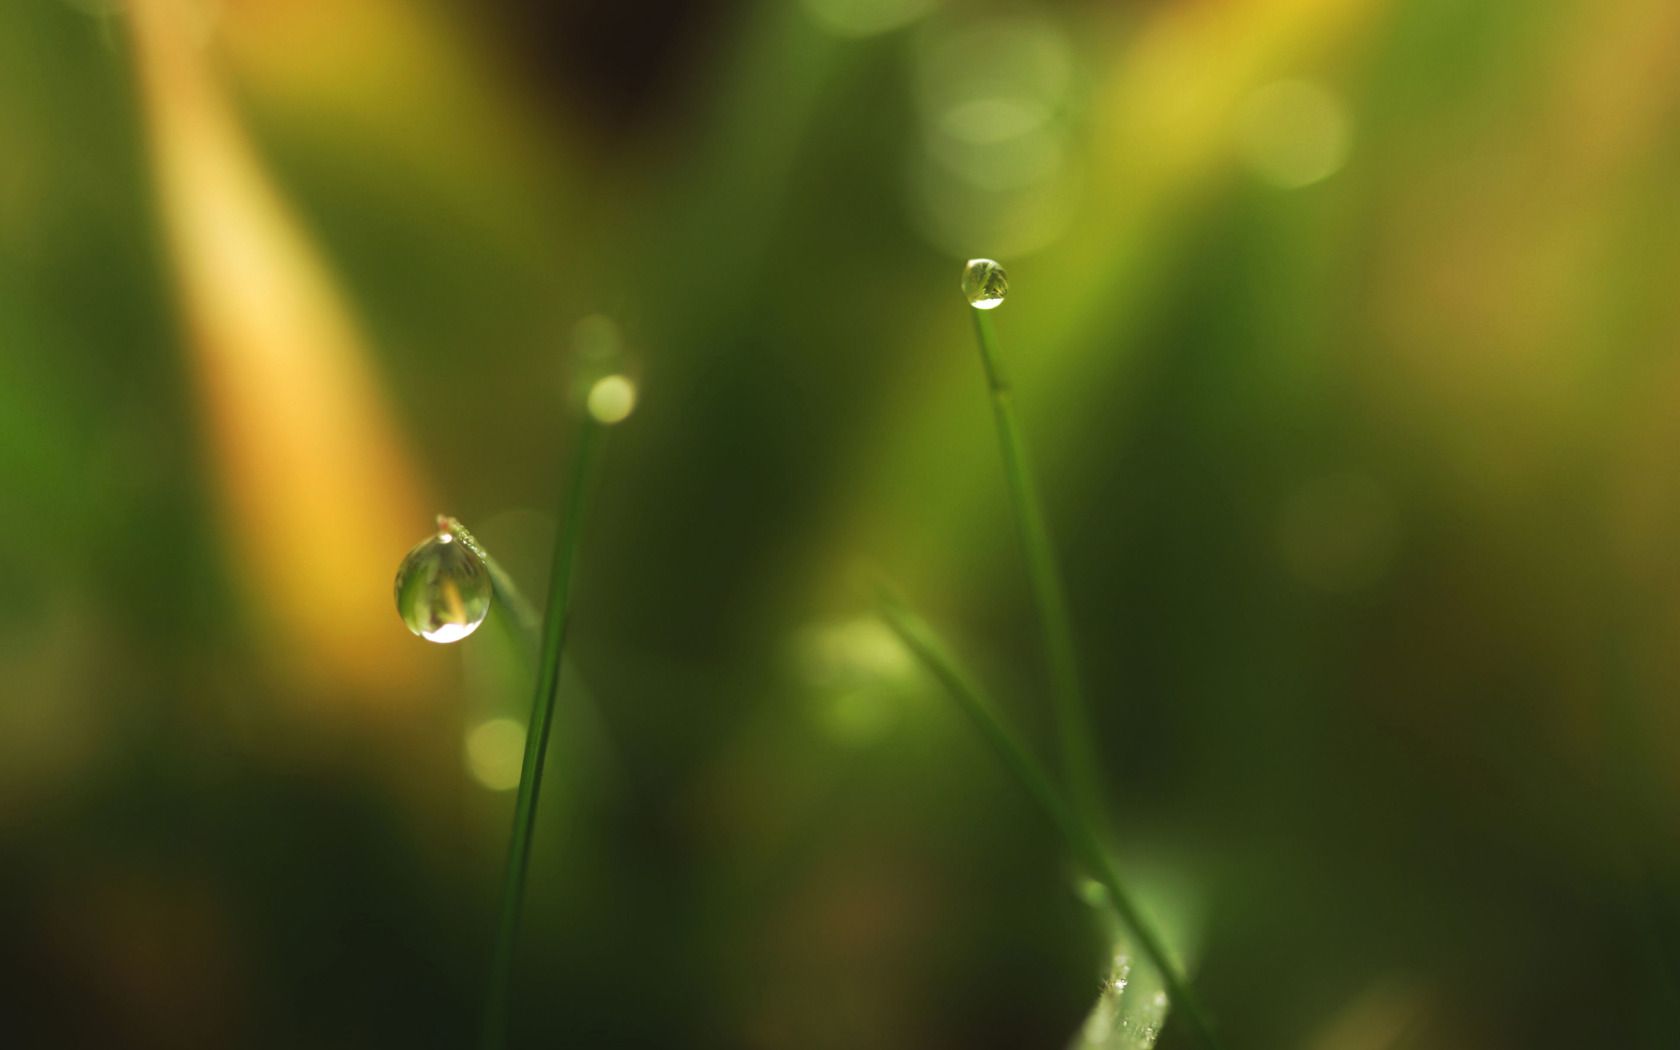 Macro Green Grass and Water Droplets widescreen wallpaper | Wide ...